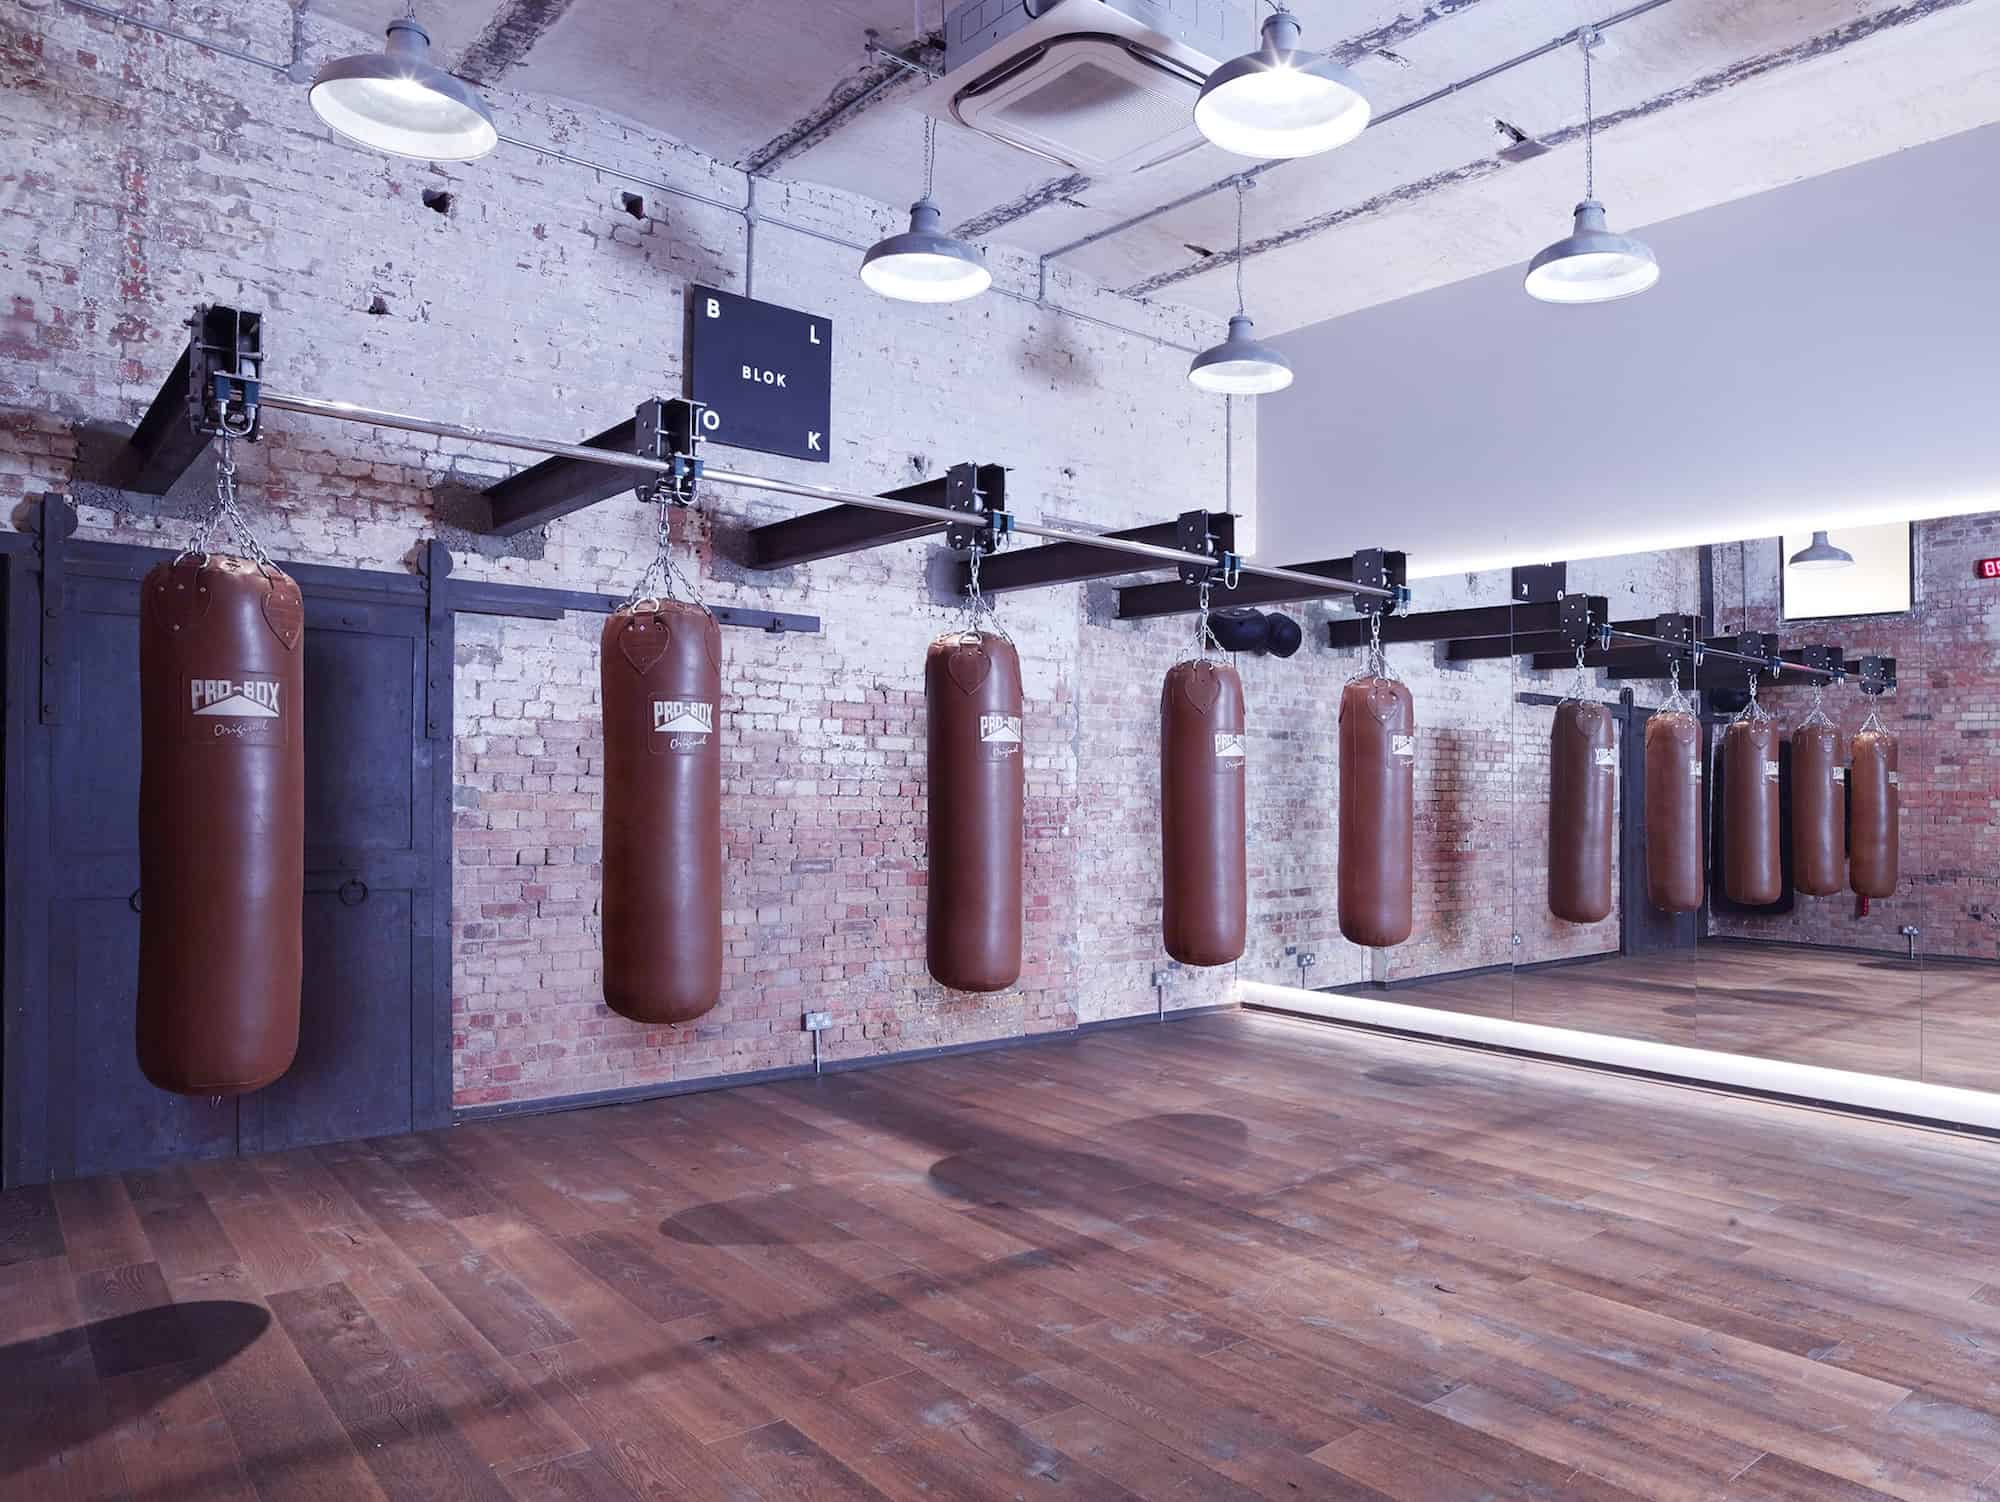 Clapton Gym E5 - A contemporary gym in the heart of Clapton with three different studios - The Location Guys